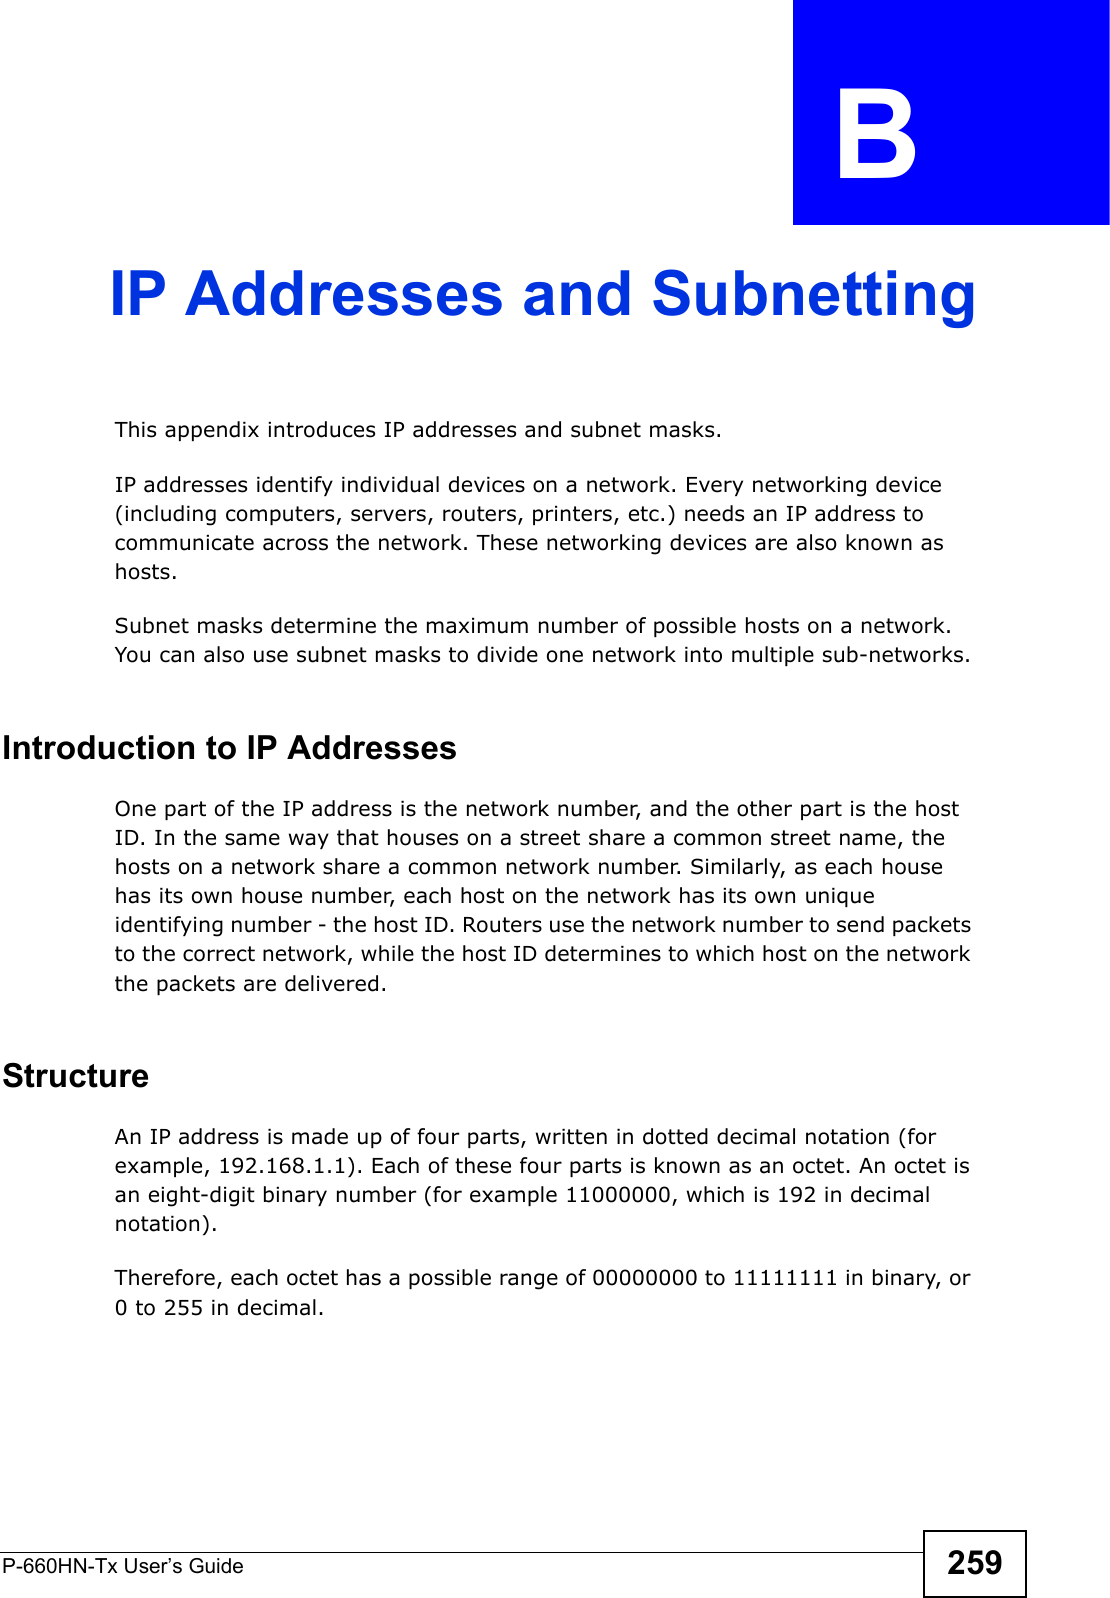 P-660HN-Tx User’s Guide 259APPENDIX  B IP Addresses and SubnettingThis appendix introduces IP addresses and subnet masks. IP addresses identify individual devices on a network. Every networking device (including computers, servers, routers, printers, etc.) needs an IP address to communicate across the network. These networking devices are also known as hosts.Subnet masks determine the maximum number of possible hosts on a network. You can also use subnet masks to divide one network into multiple sub-networks.Introduction to IP AddressesOne part of the IP address is the network number, and the other part is the host ID. In the same way that houses on a street share a common street name, the hosts on a network share a common network number. Similarly, as each house has its own house number, each host on the network has its own unique identifying number - the host ID. Routers use the network number to send packets to the correct network, while the host ID determines to which host on the network the packets are delivered.StructureAn IP address is made up of four parts, written in dotted decimal notation (for example, 192.168.1.1). Each of these four parts is known as an octet. An octet is an eight-digit binary number (for example 11000000, which is 192 in decimal notation). Therefore, each octet has a possible range of 00000000 to 11111111 in binary, or 0 to 255 in decimal.